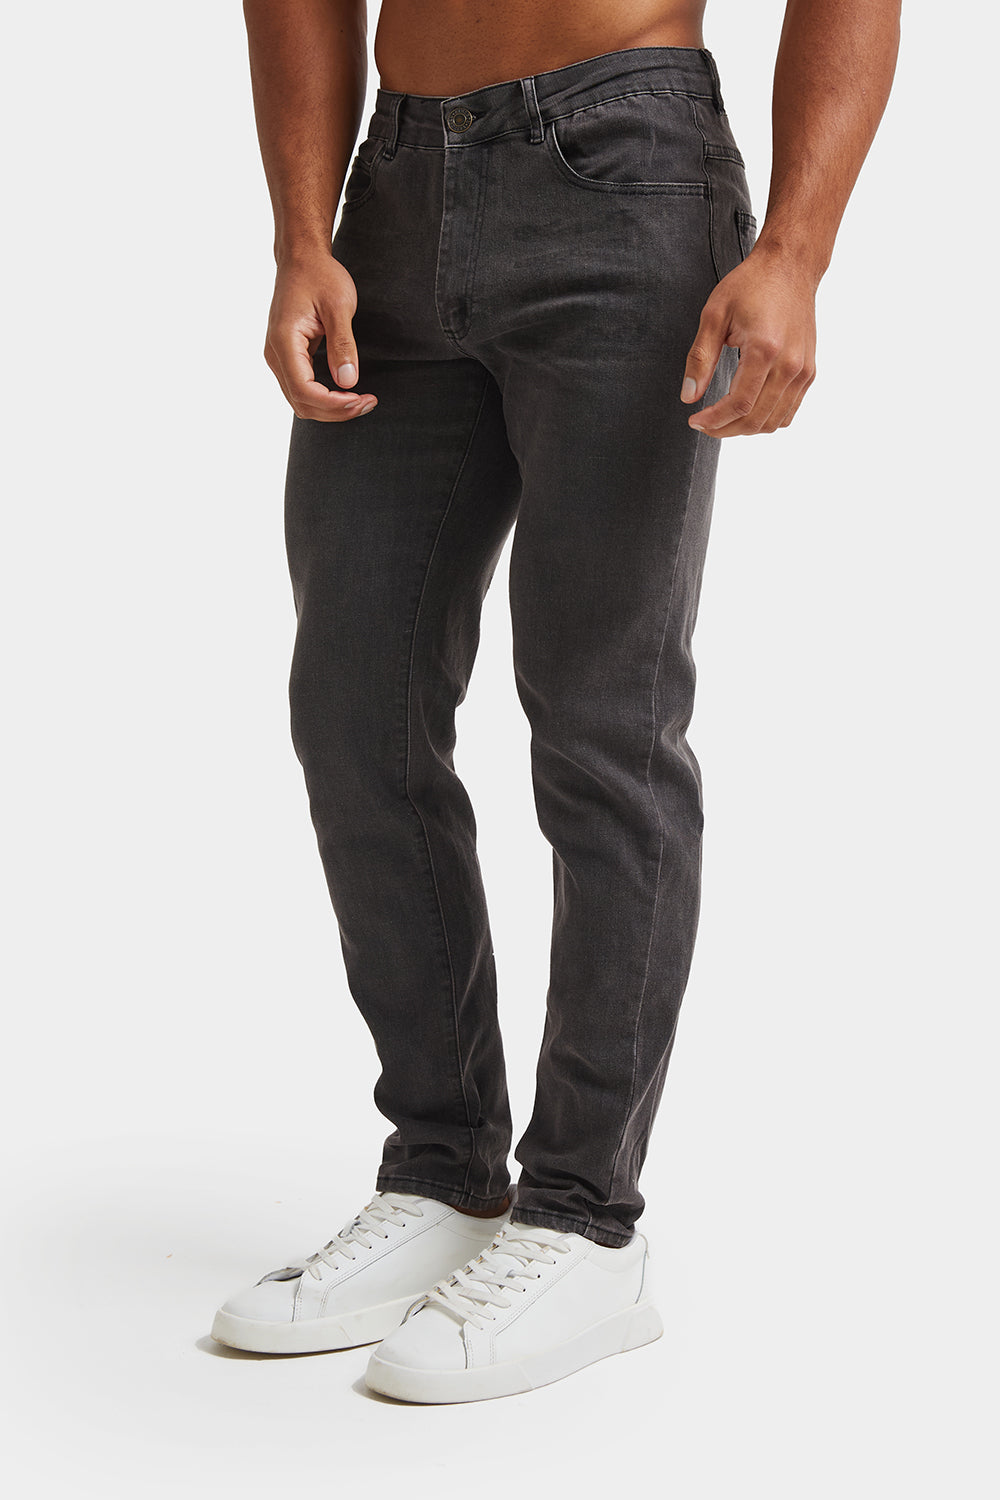 - TAILORED Fit in - Dark Grey ATHLETE USA Jeans Athletic